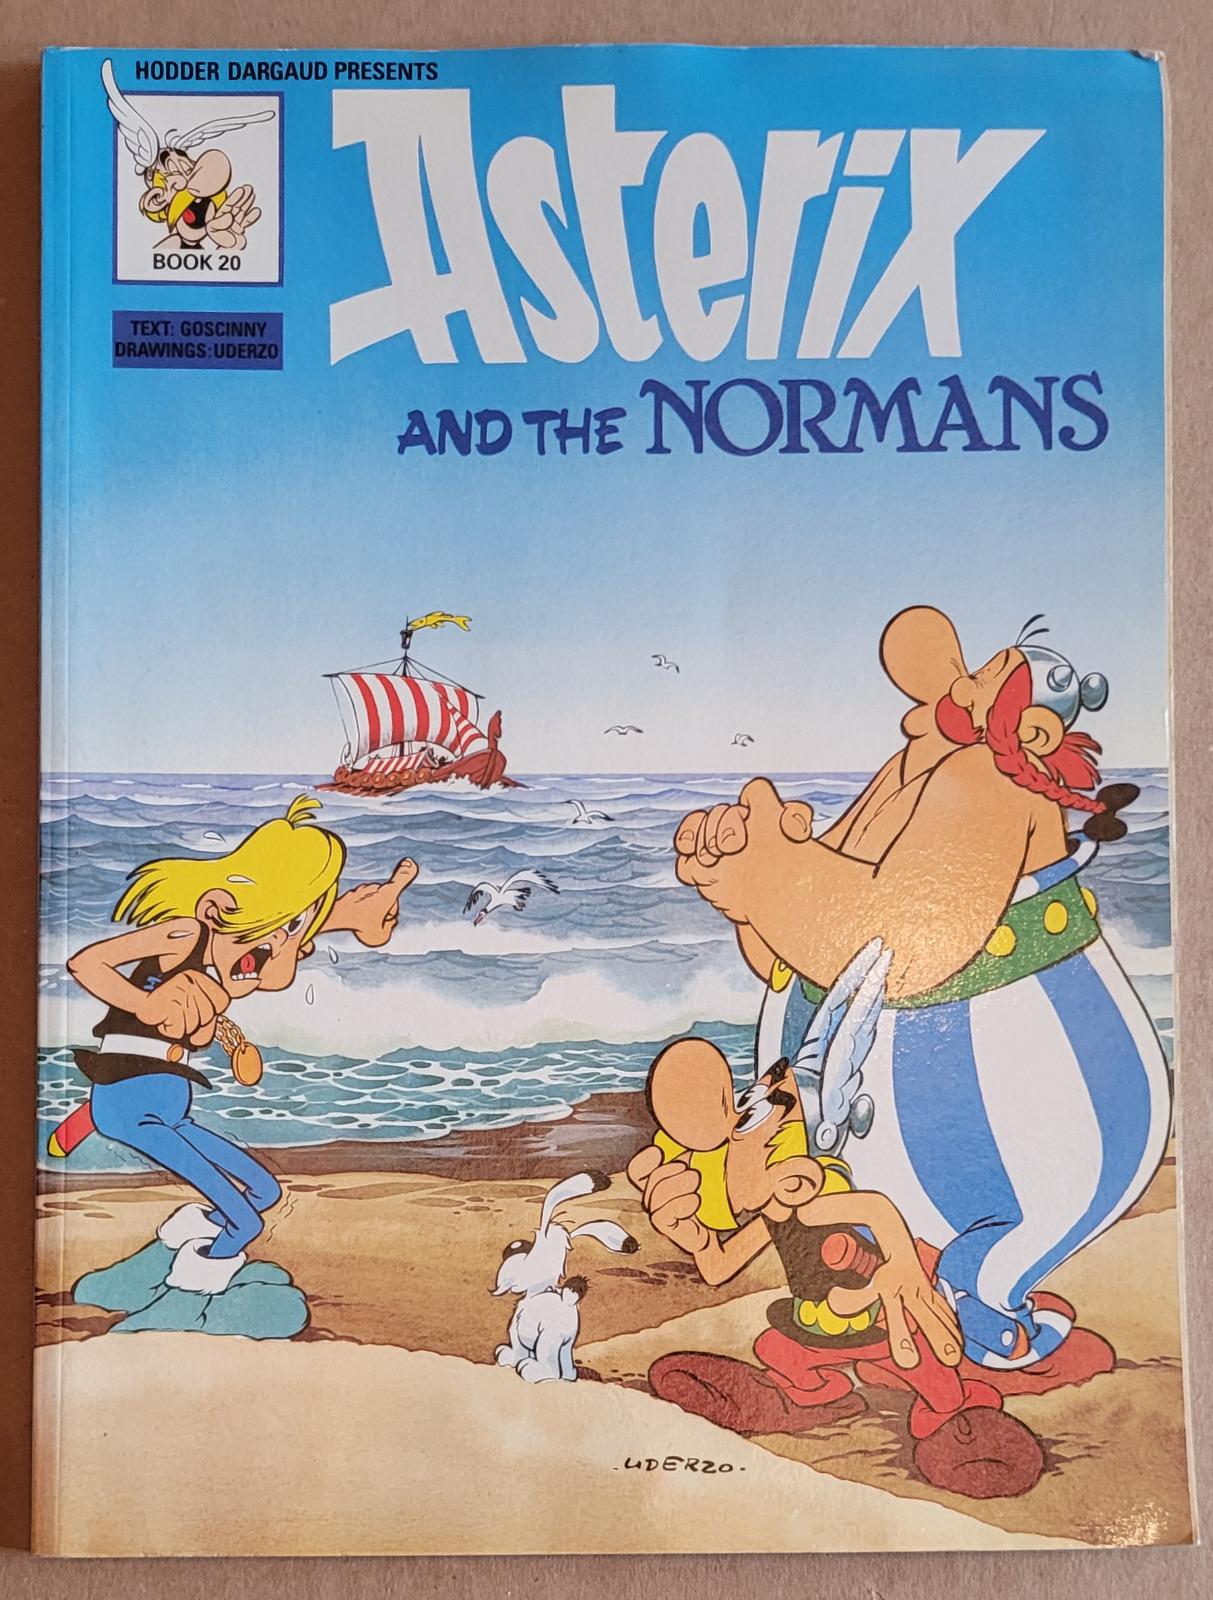 Asterix and the Normans, Asterix Book 20